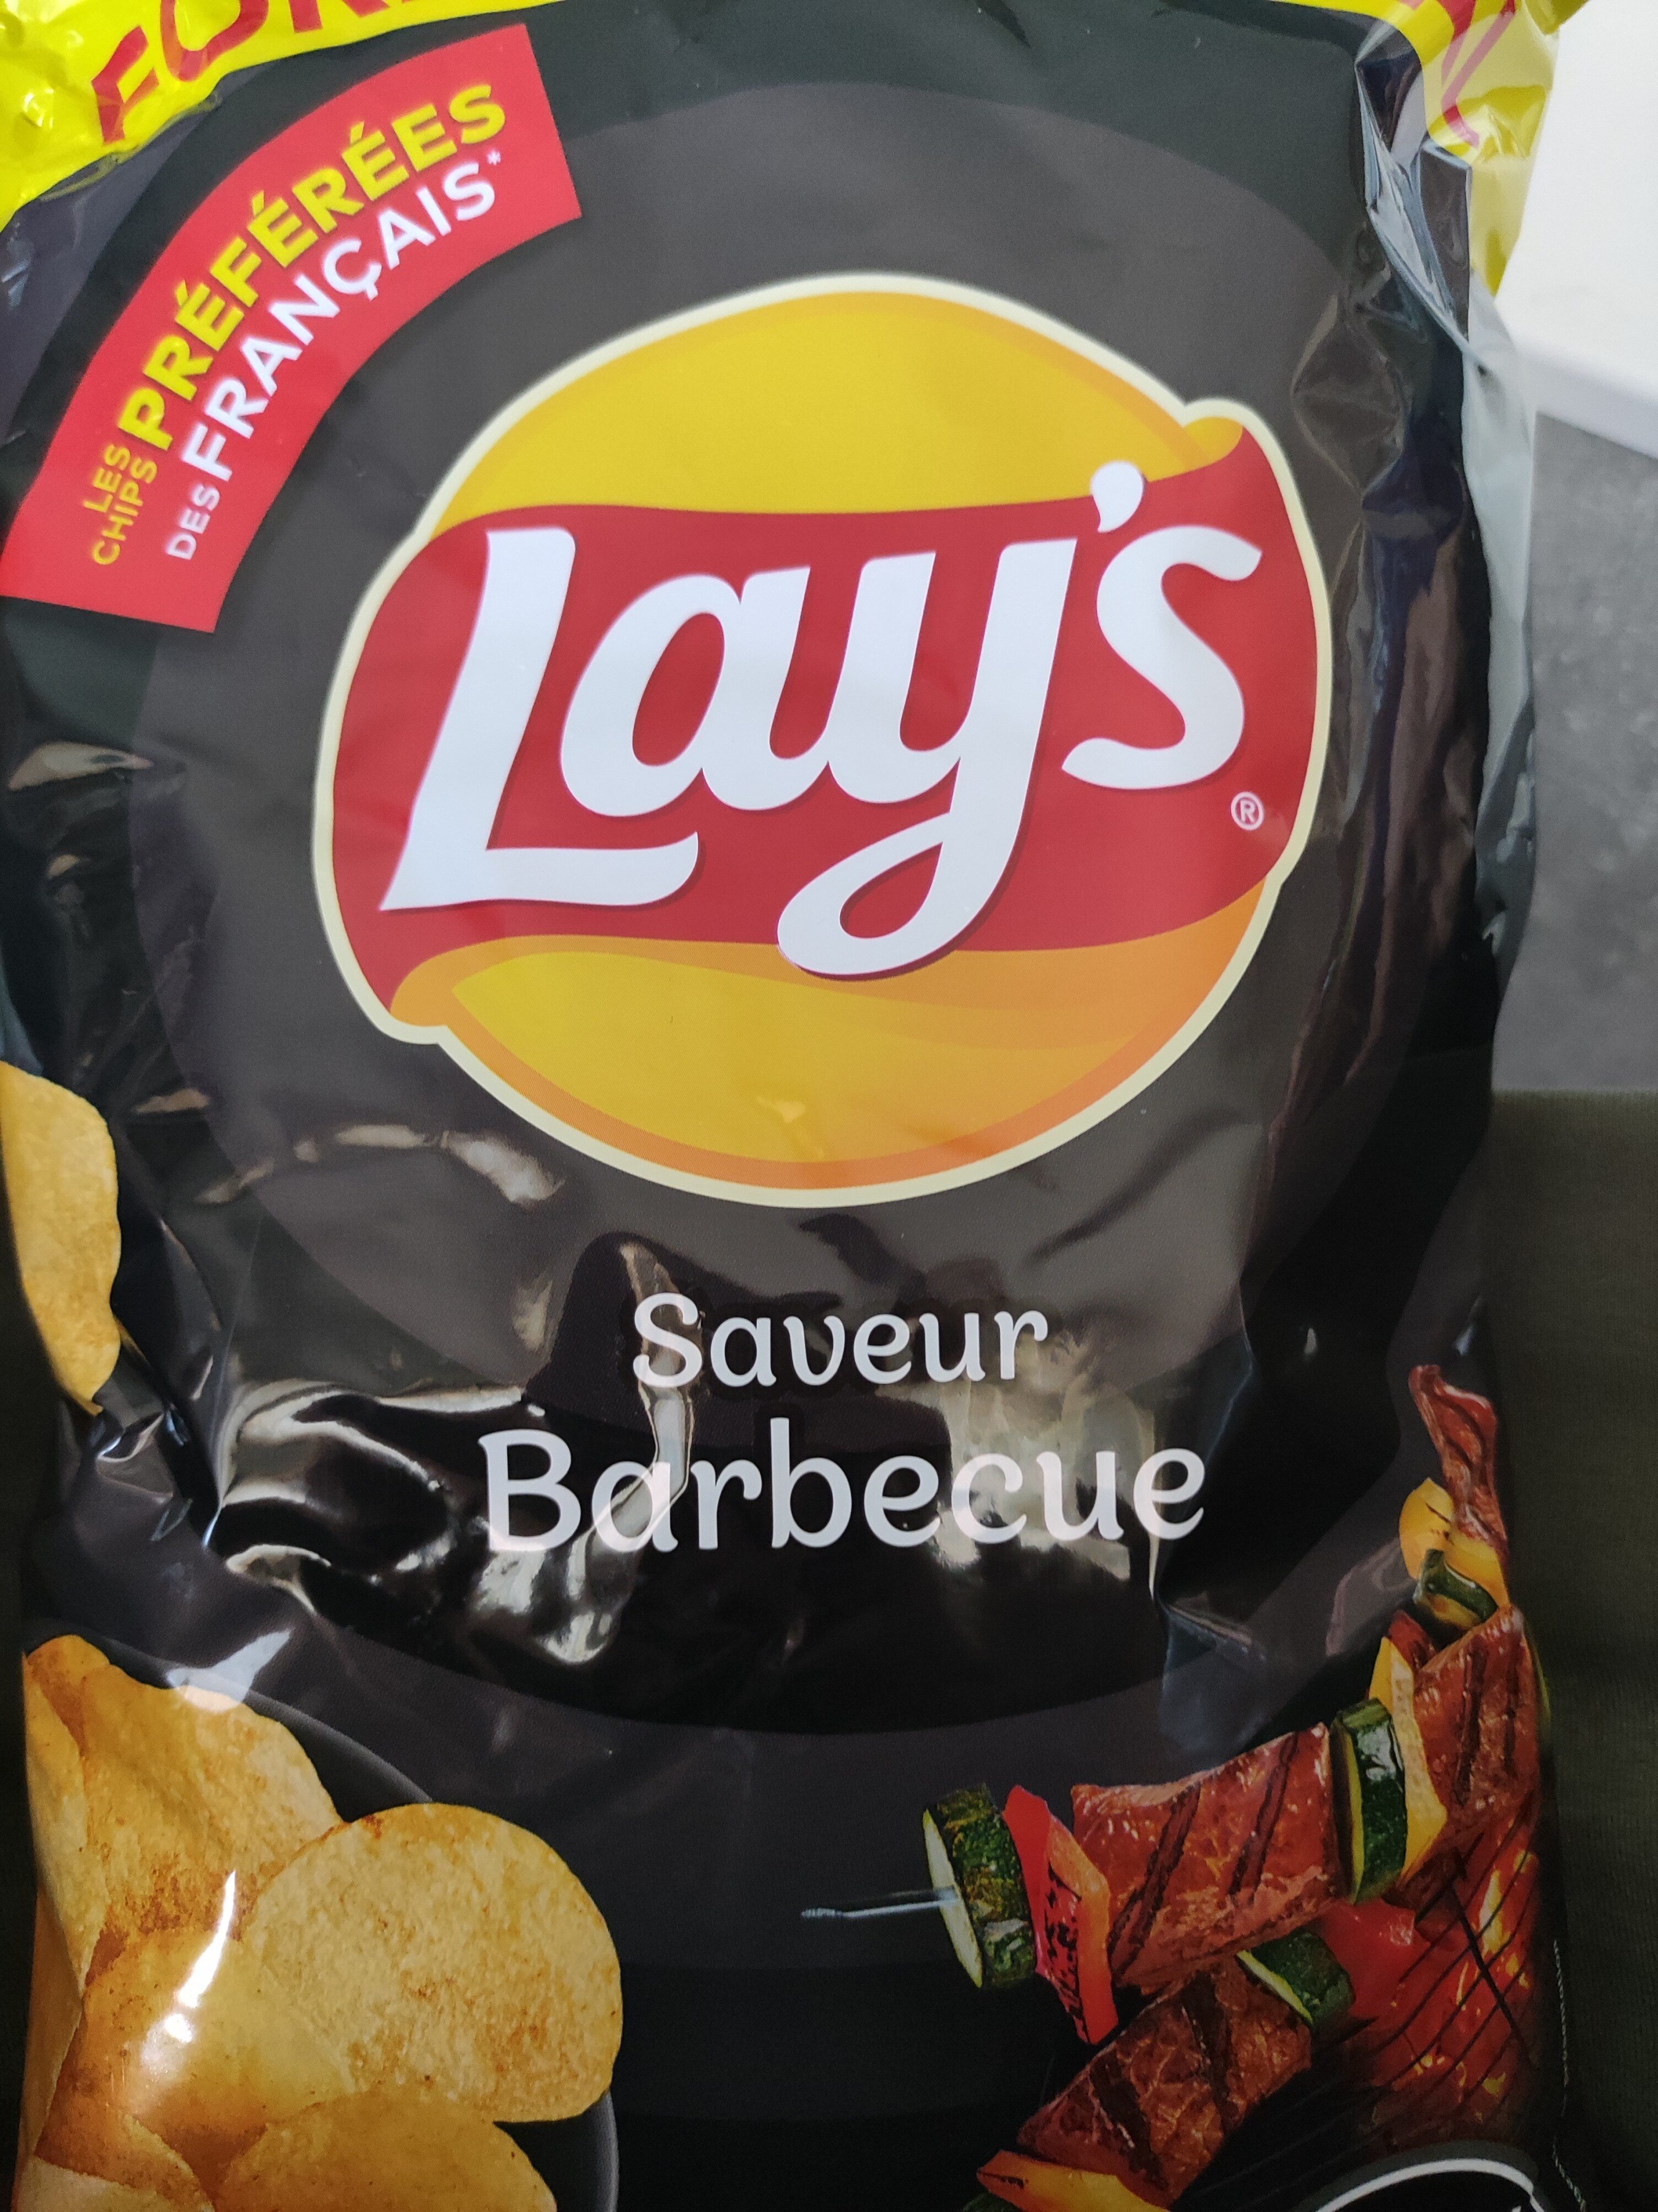 Lay's saveur barbecue format familial - Ingredients